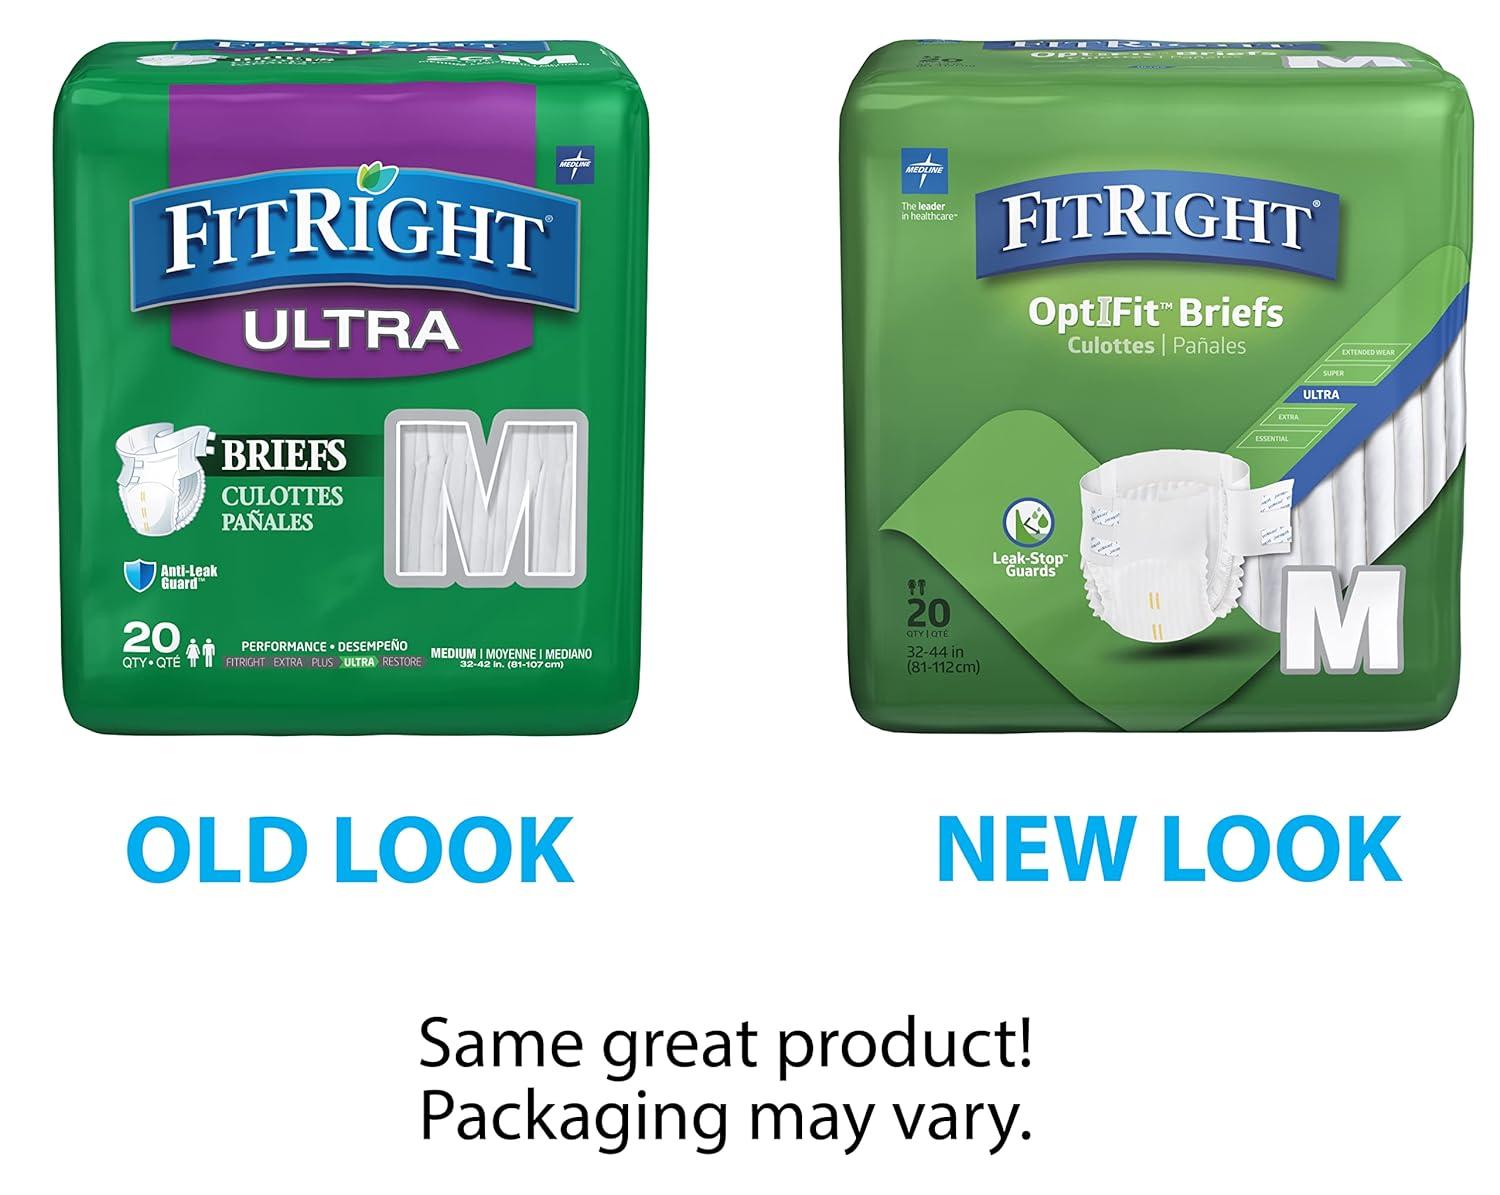 FitRight® Super Adult Incontinence Underwear - Heavy Absorbency